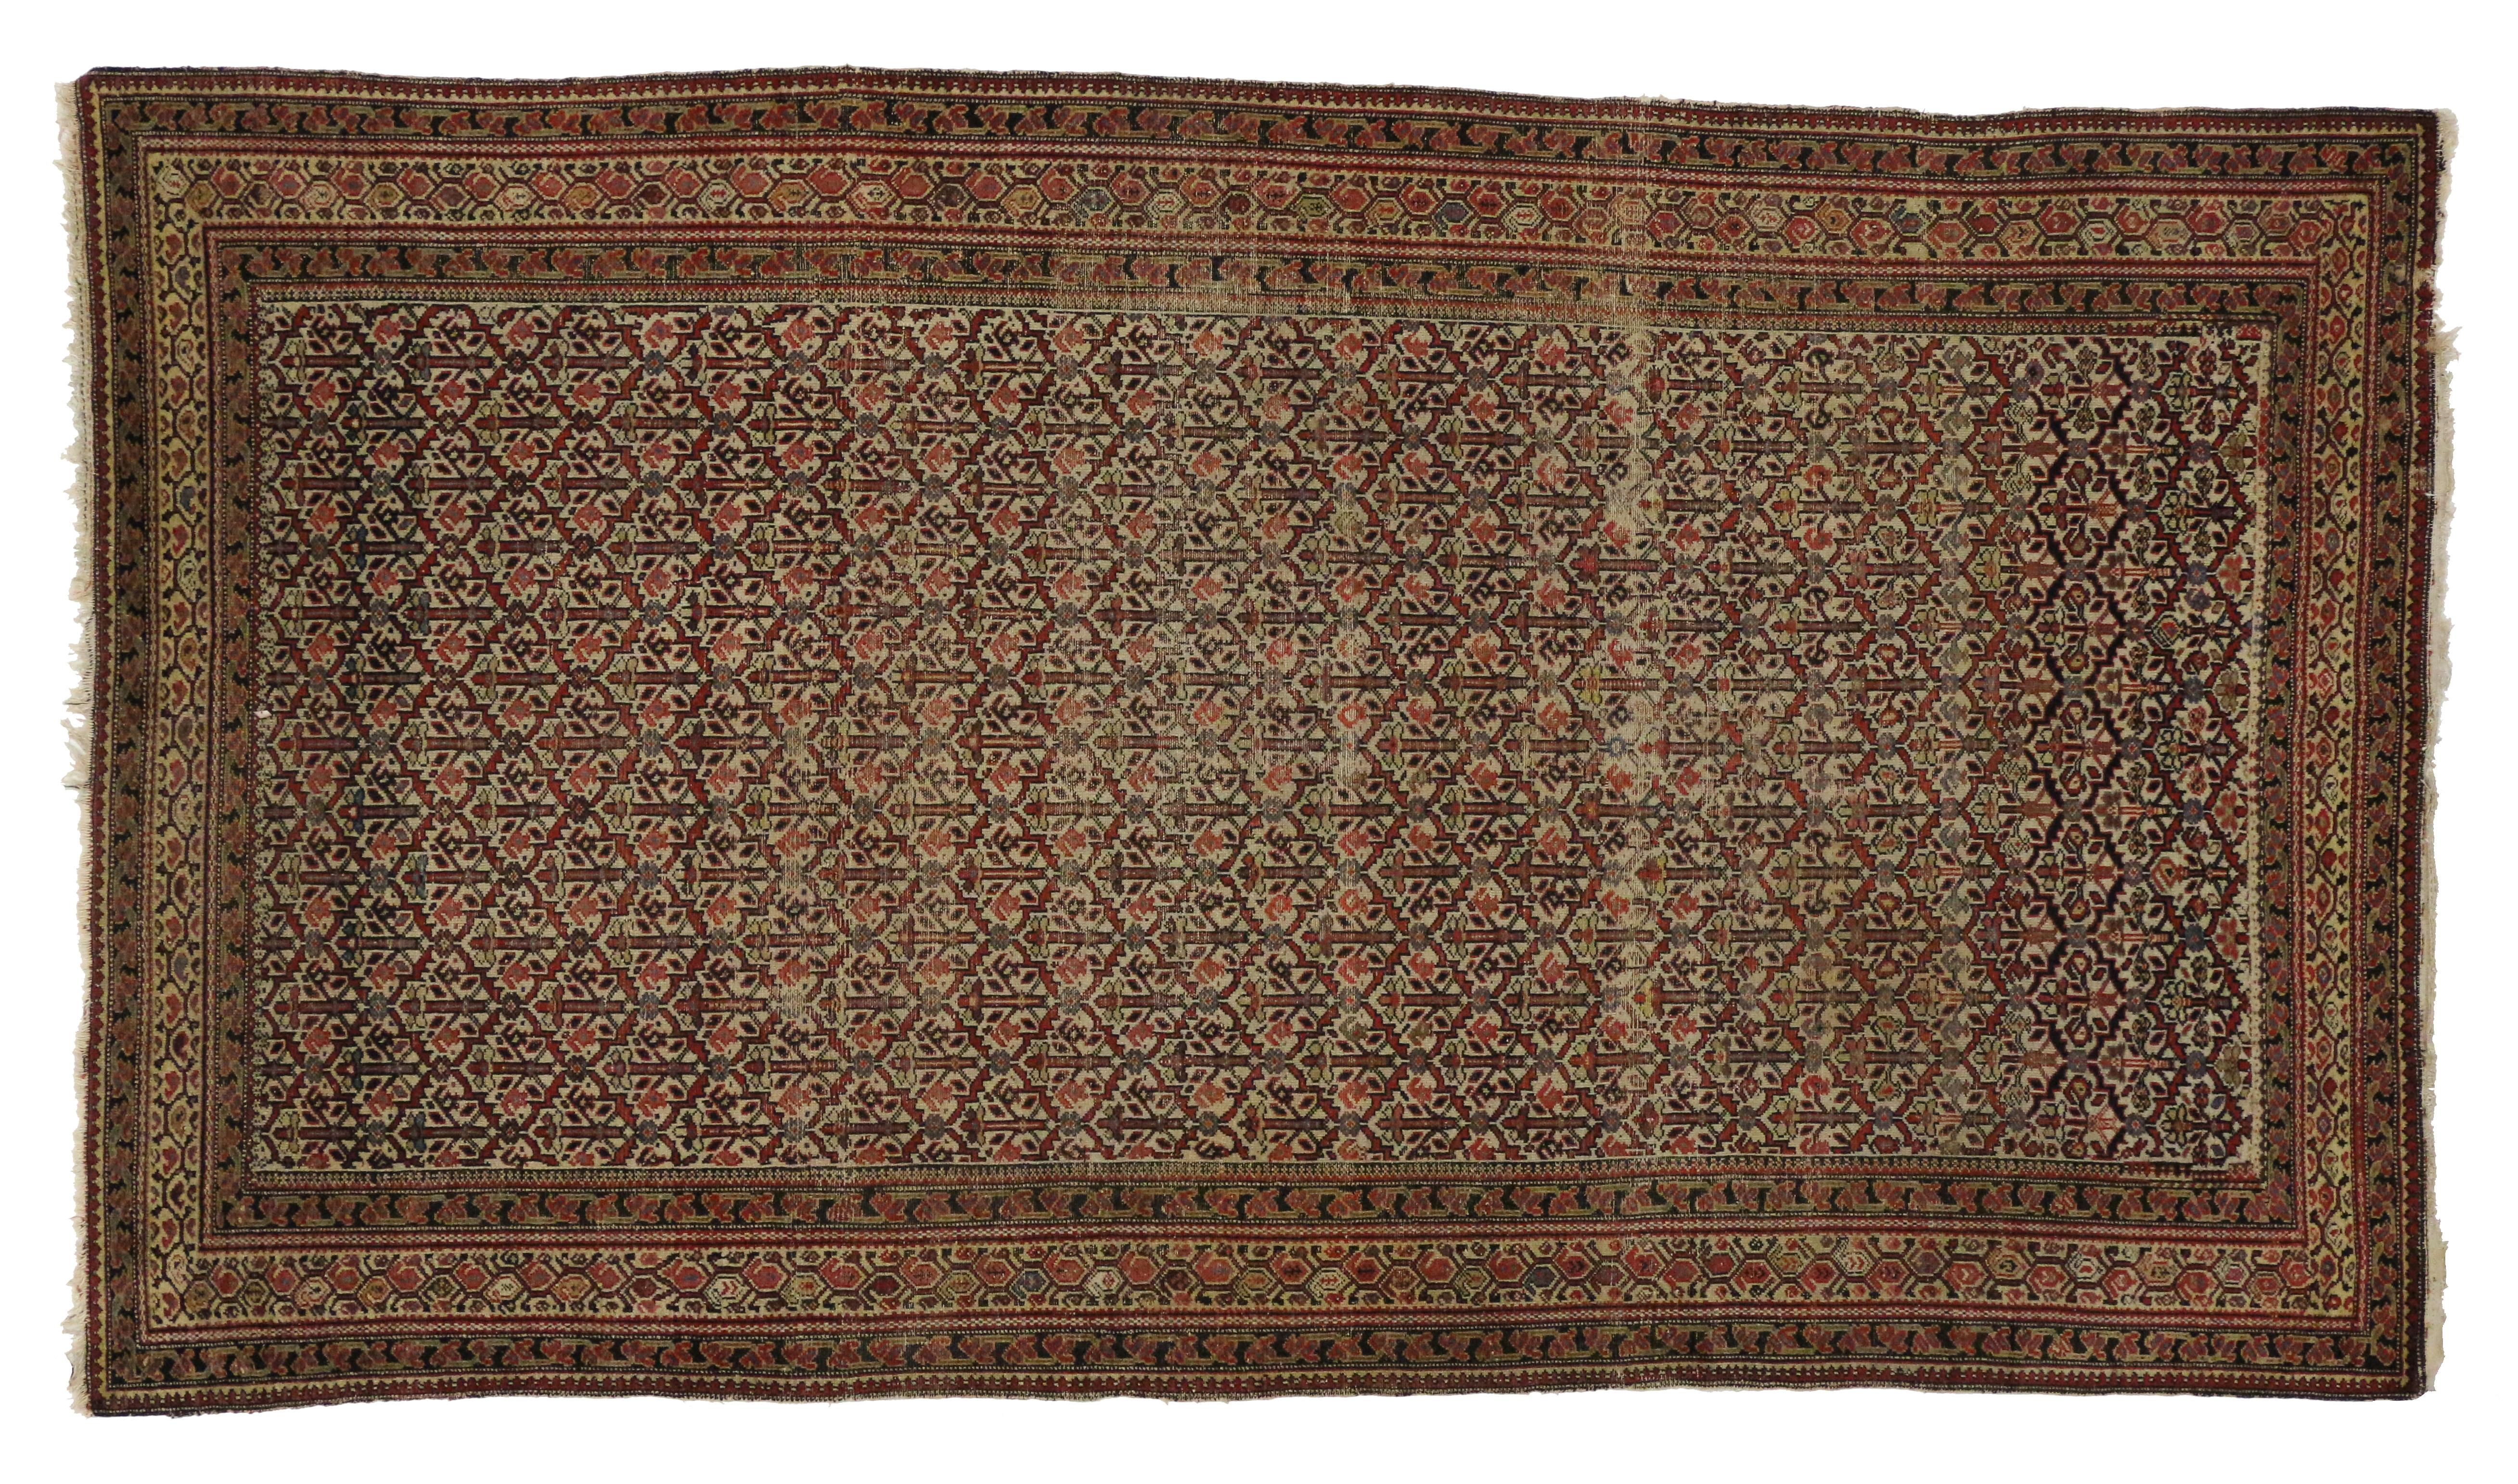 Distressed Antique Malayer Persian Area Rug with Industrial Rustic Style In Distressed Condition For Sale In Dallas, TX